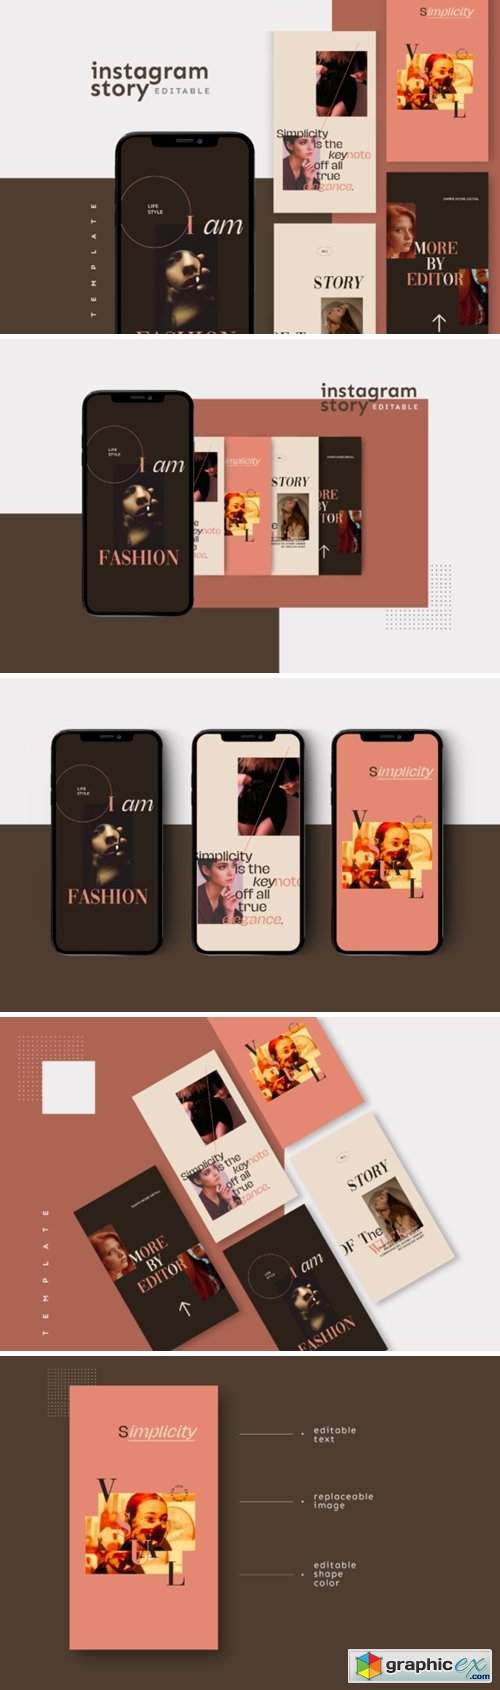  Instagram Story Template 2654447 